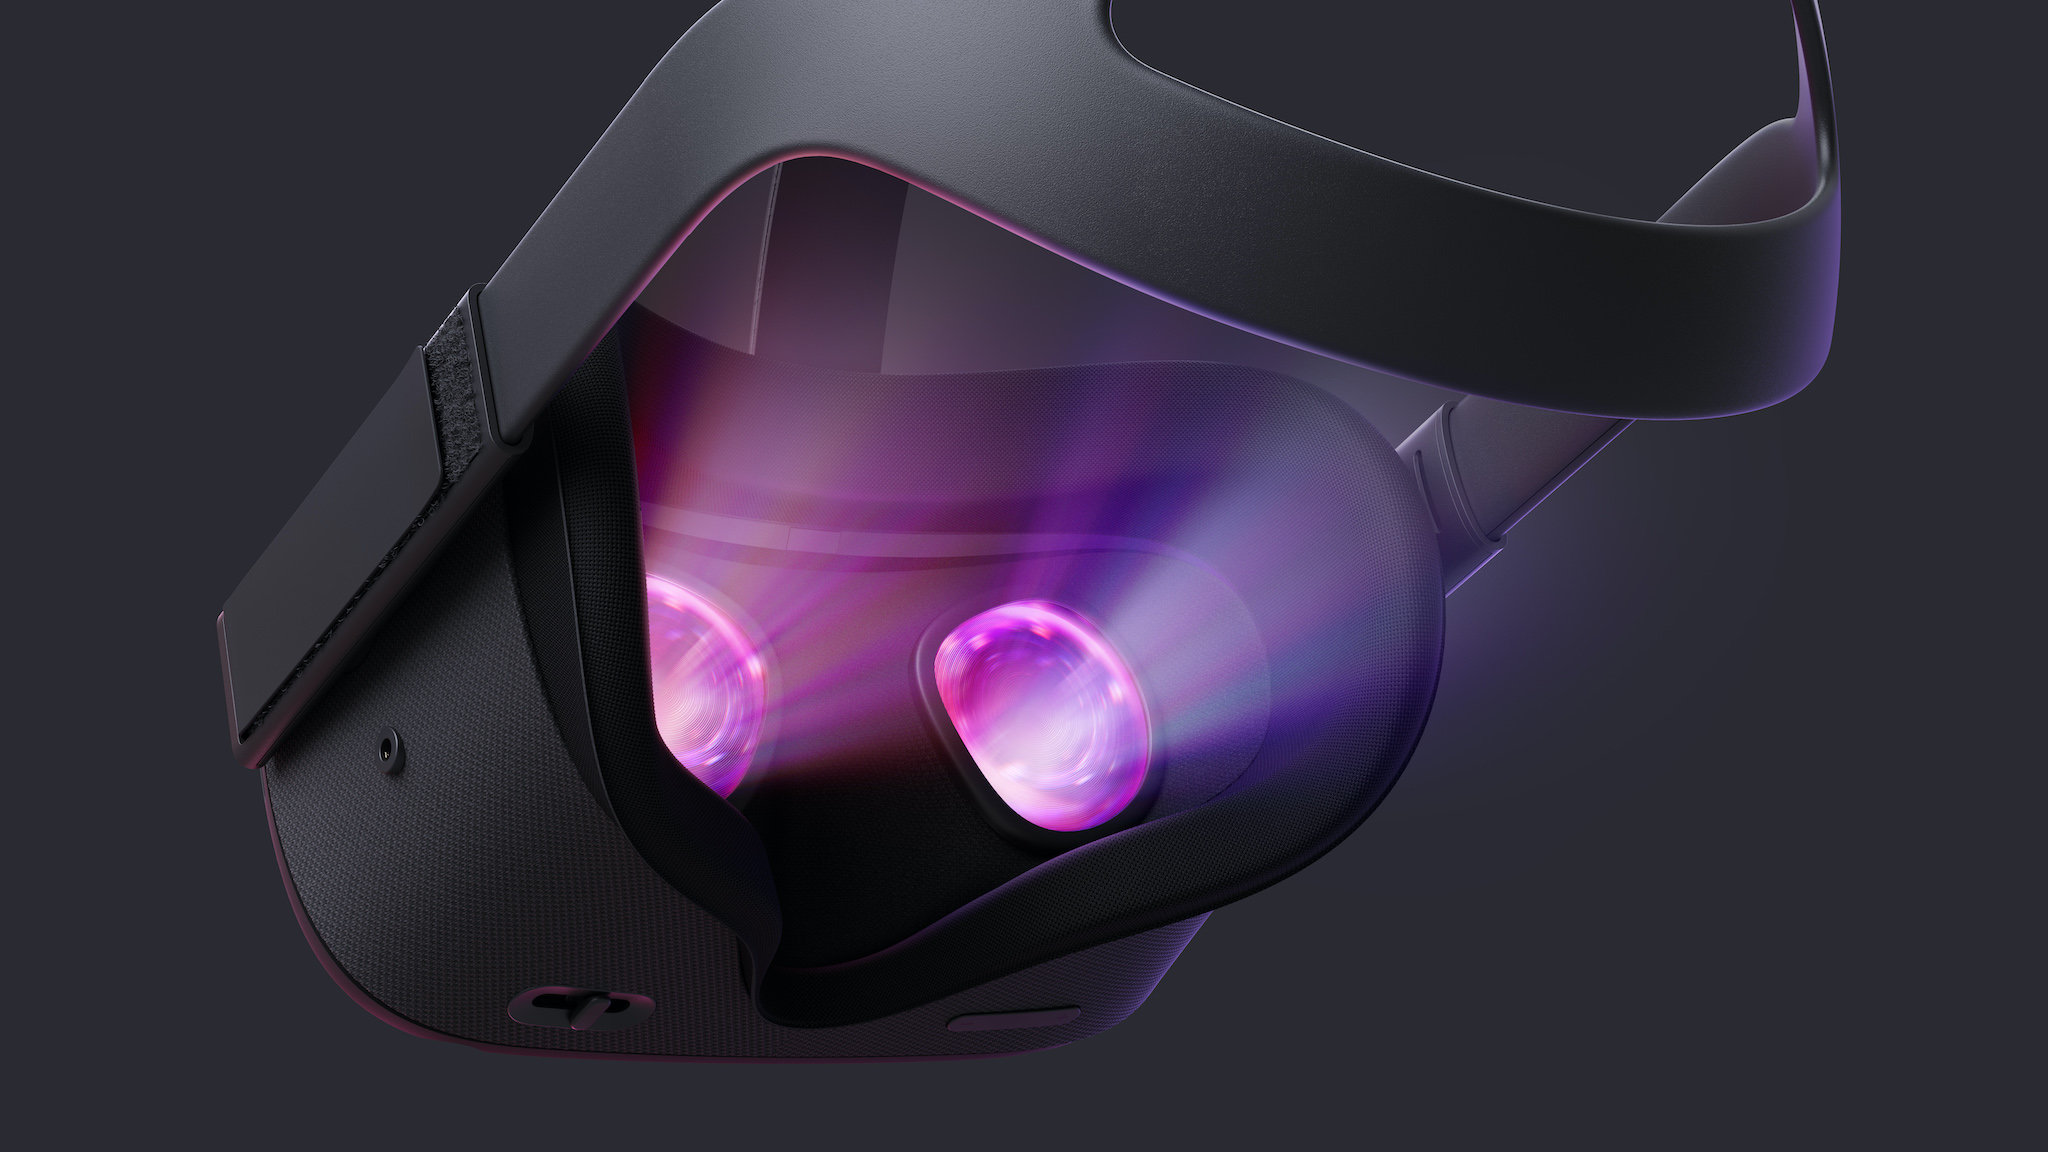 Skoleuddannelse segment legation A year after launch, Oculus says Quest is starting a VR revolution -  Protocol